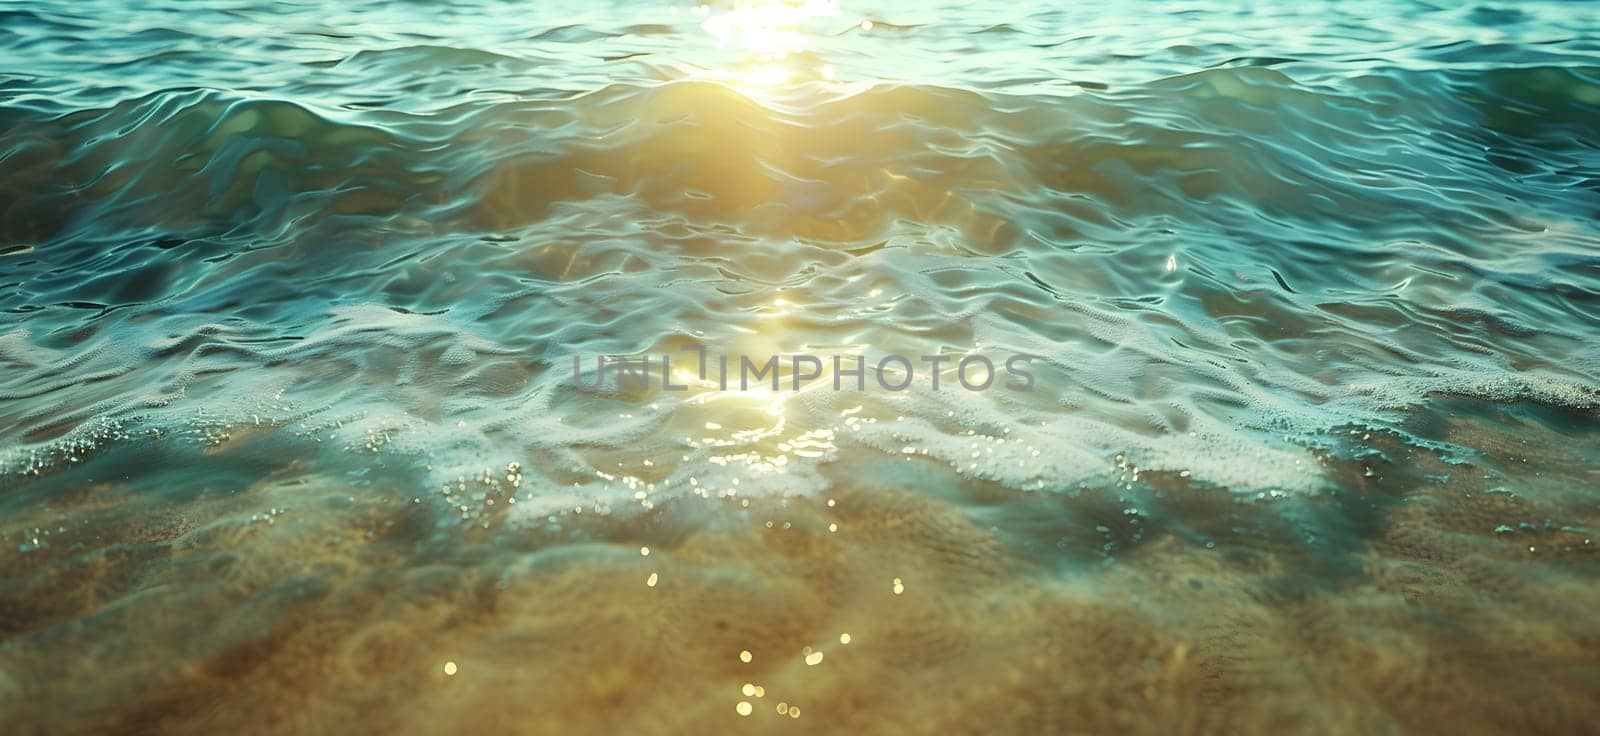 The sun creates a beautiful pattern as it shines through the fluid waves of the ocean, painting a stunning landscape of light on the underwater world